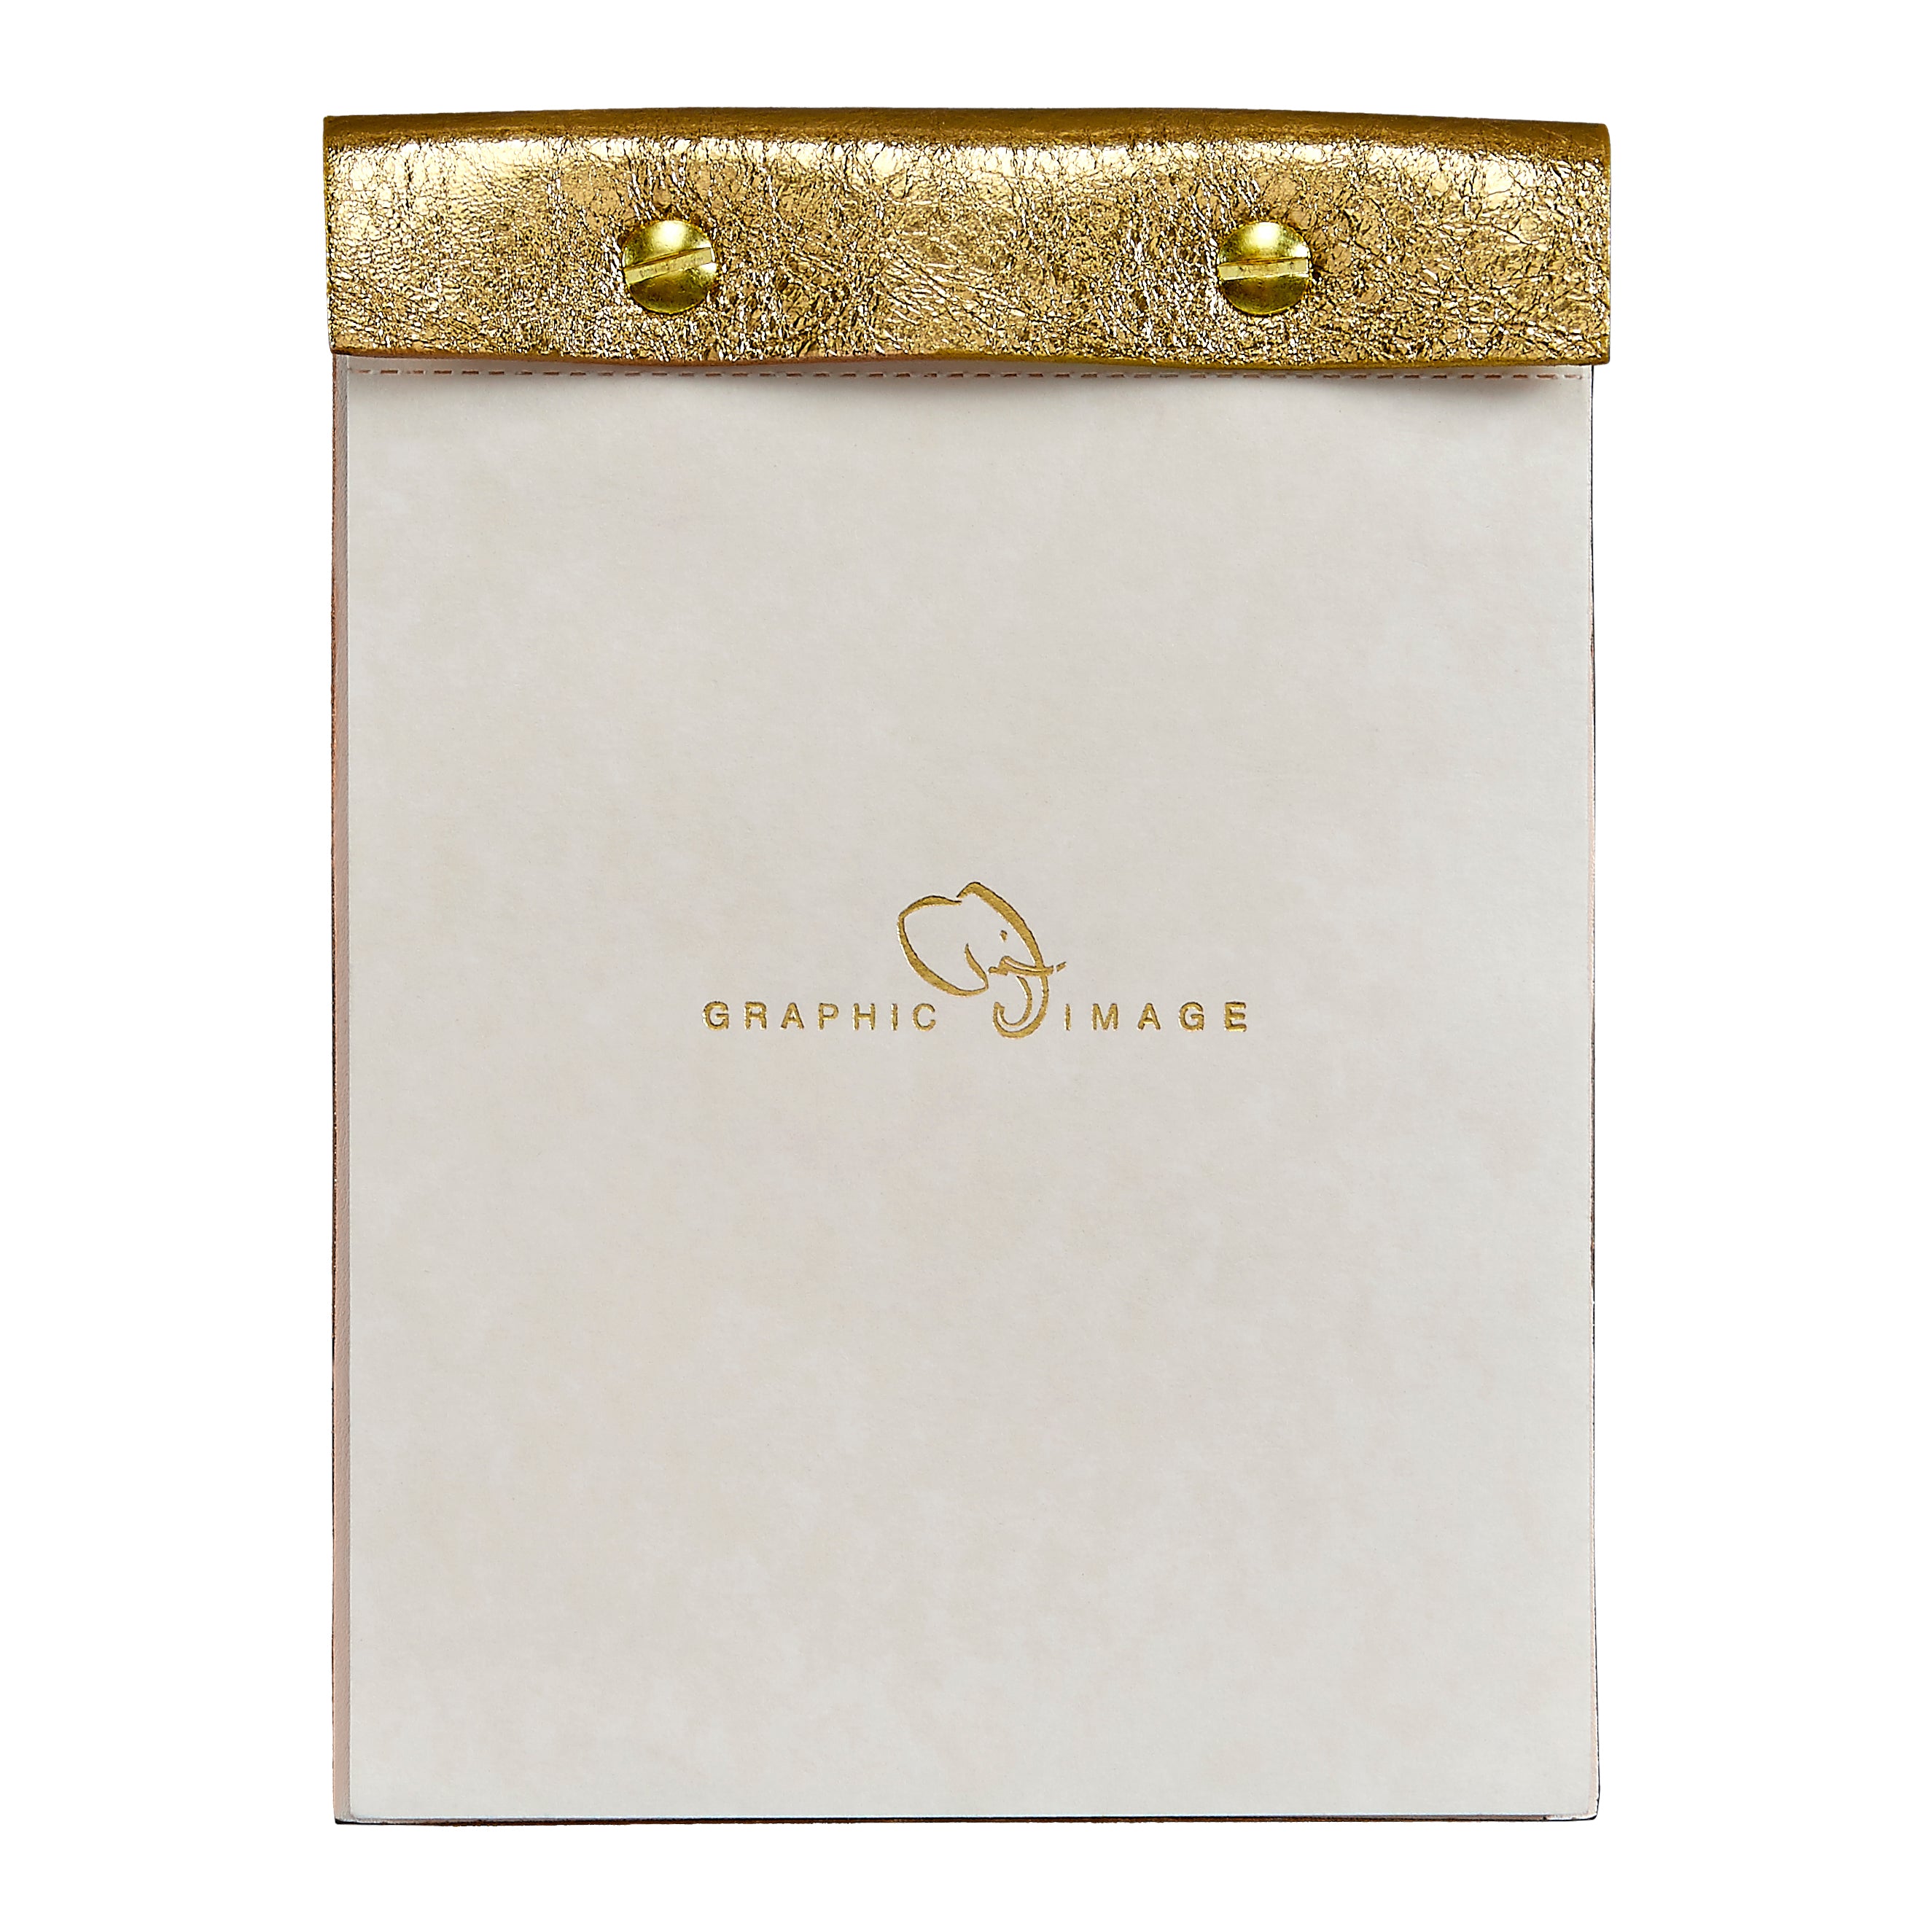 Graphic Image Desk Notepad Gold Crackle Metallic Leather